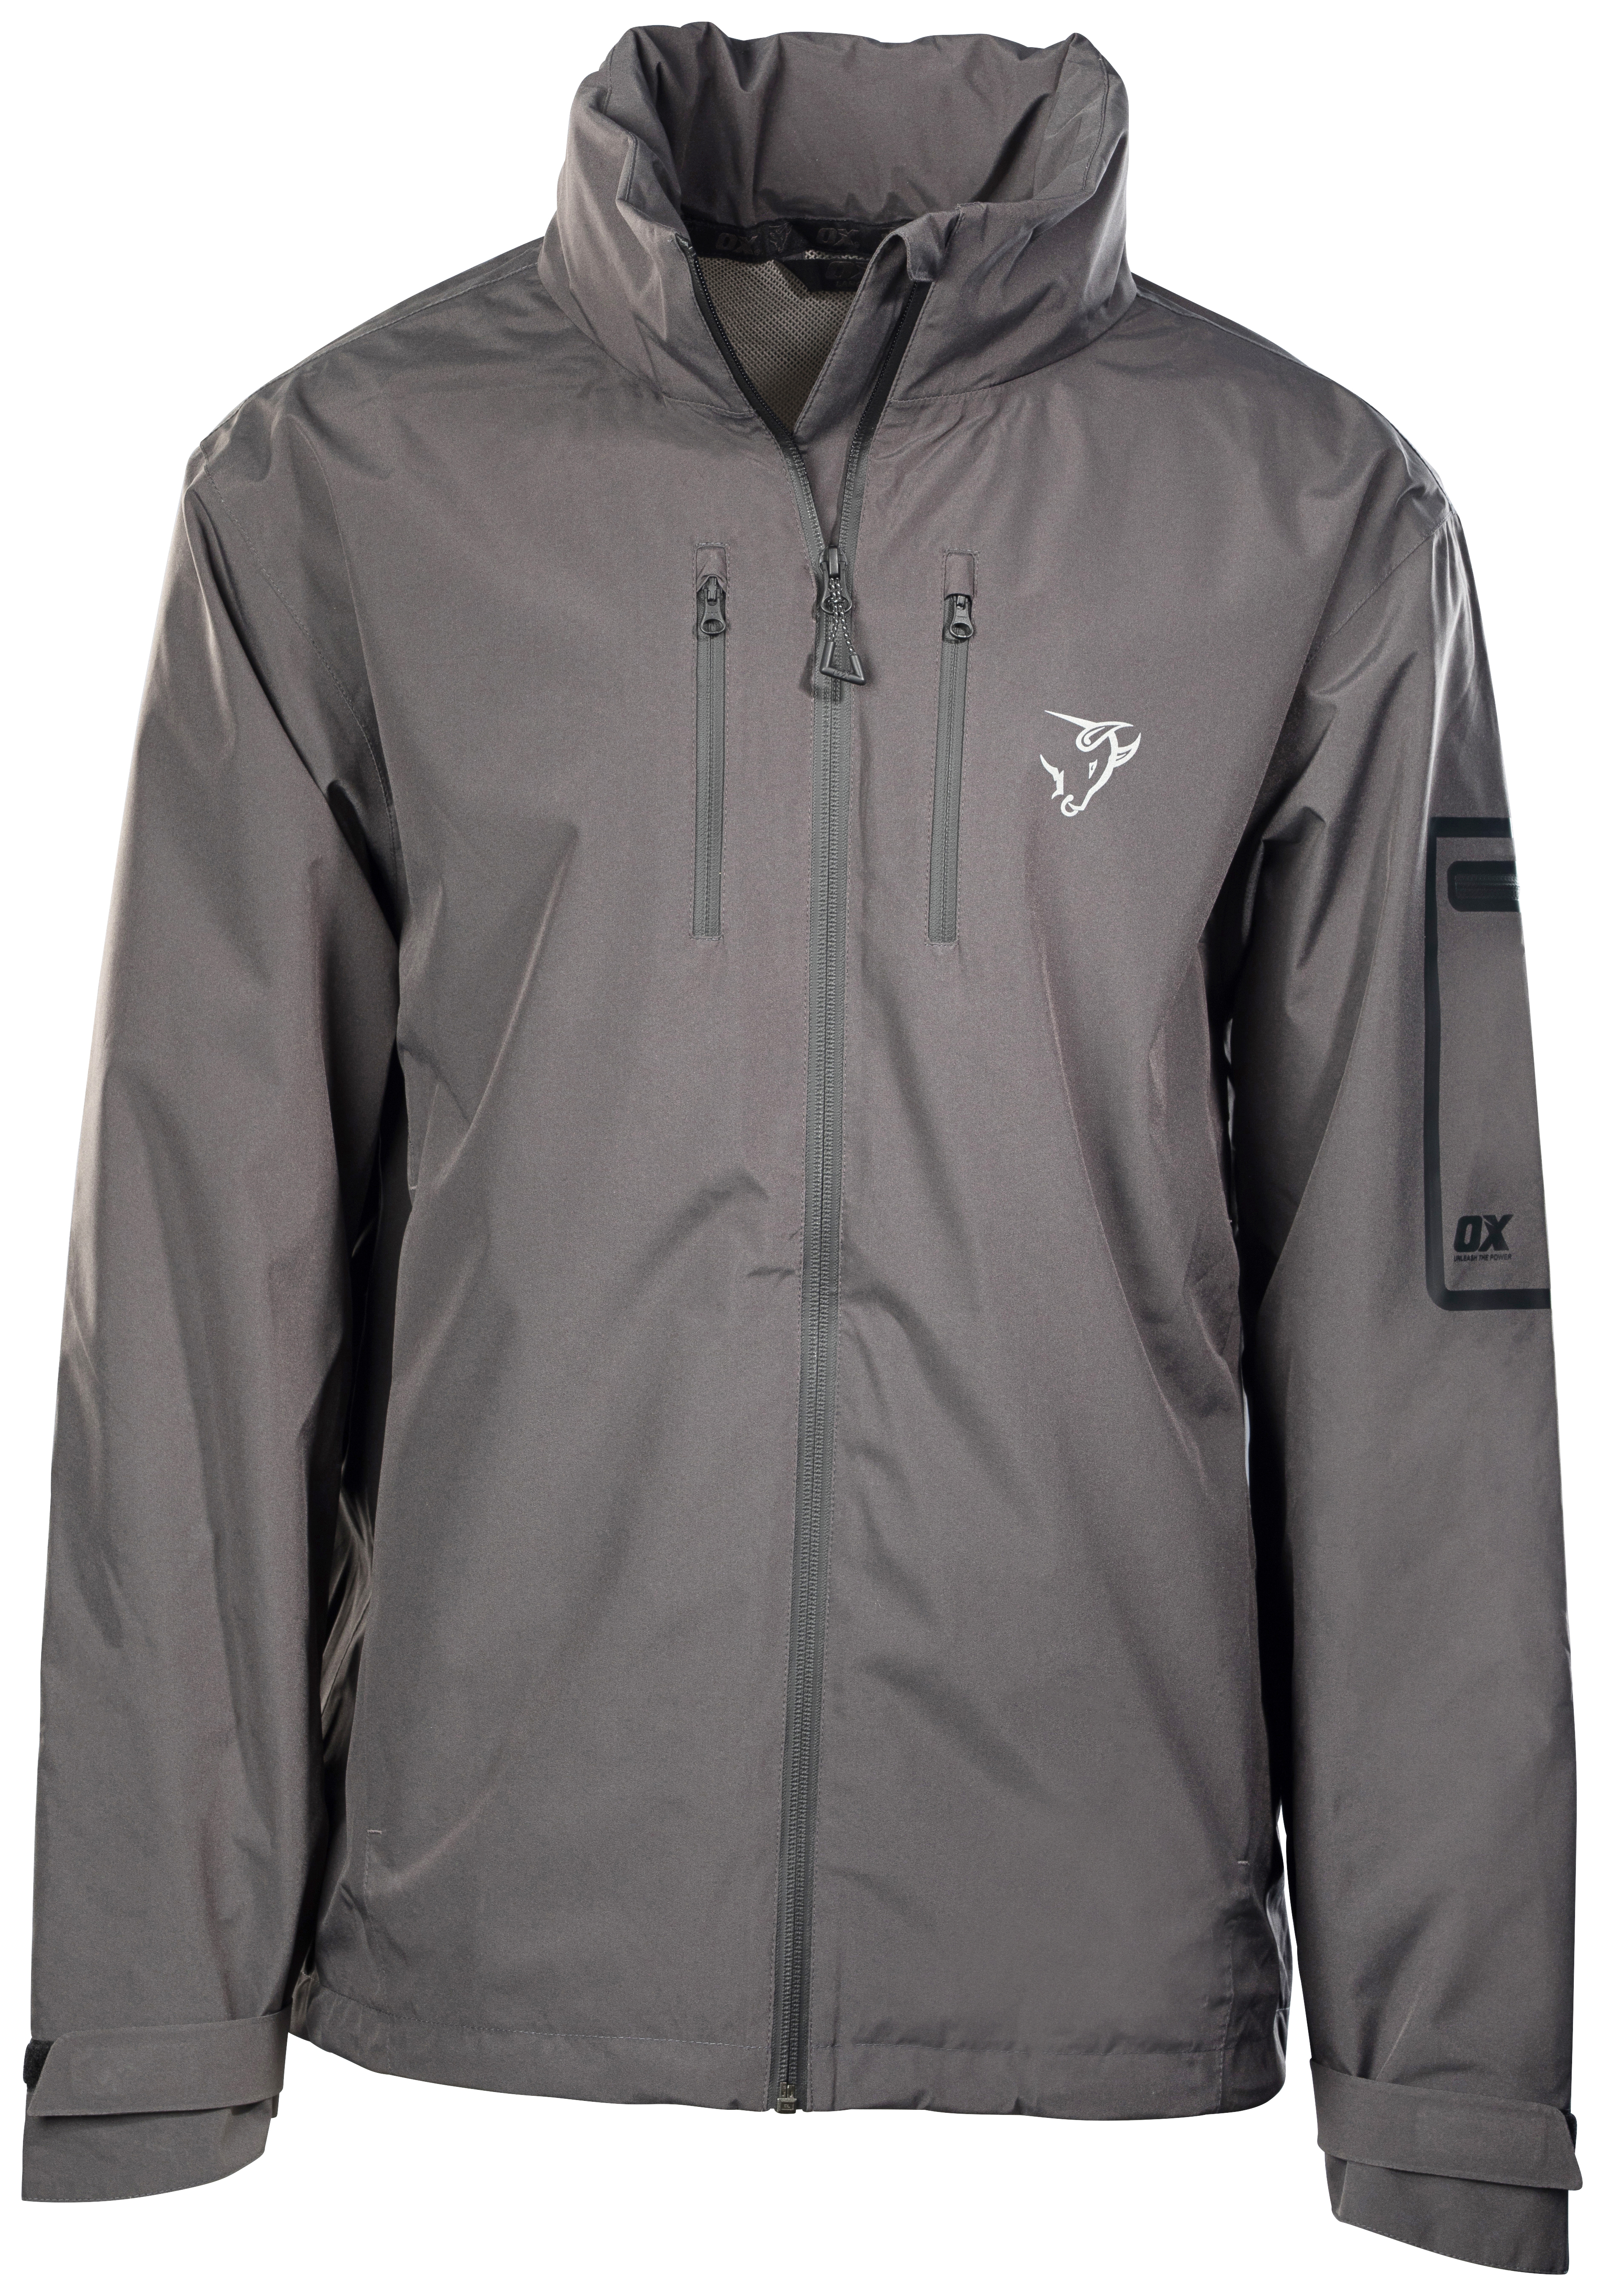 Image of OX Packable Jacket, in Grey Lightweight, Size: M